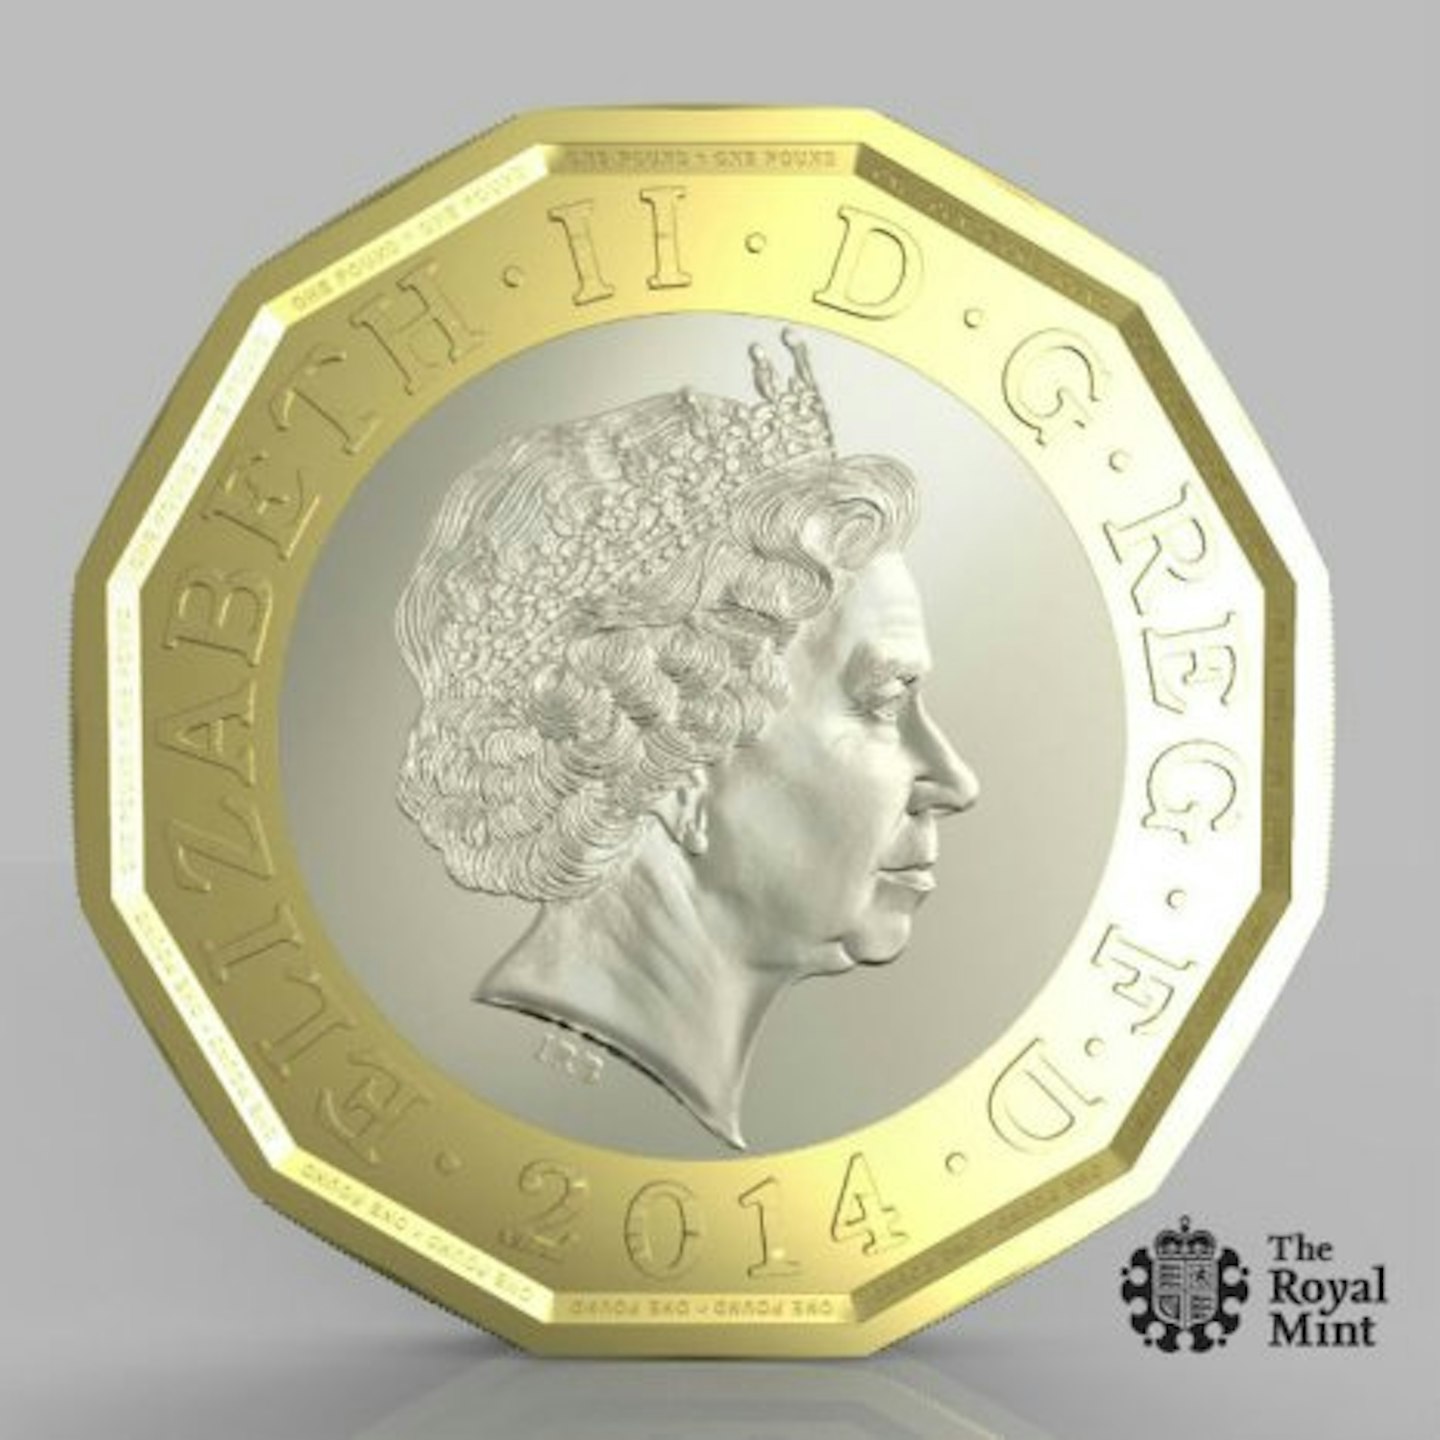 Images of the new pound coin have been released by the Royal Mint